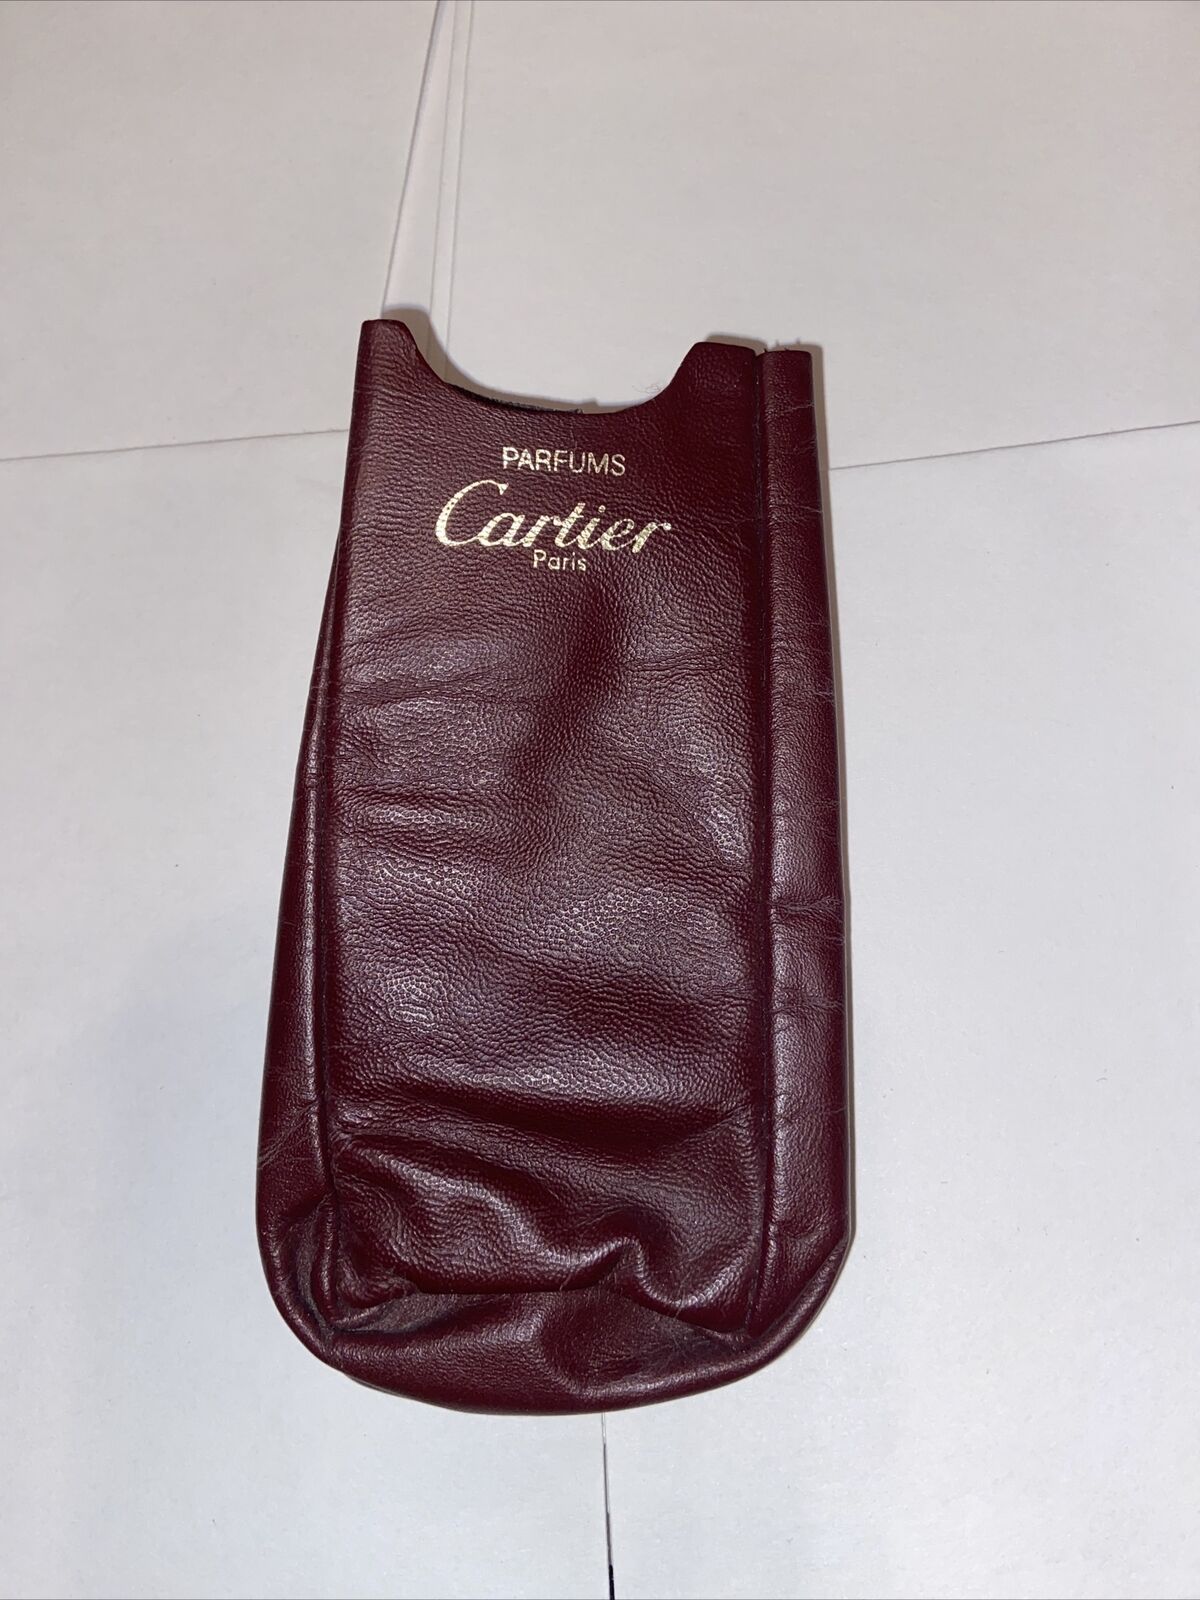 Vintage Cartier Paris Parfums Empty Leather Pouch Neat And Great Quality Leather